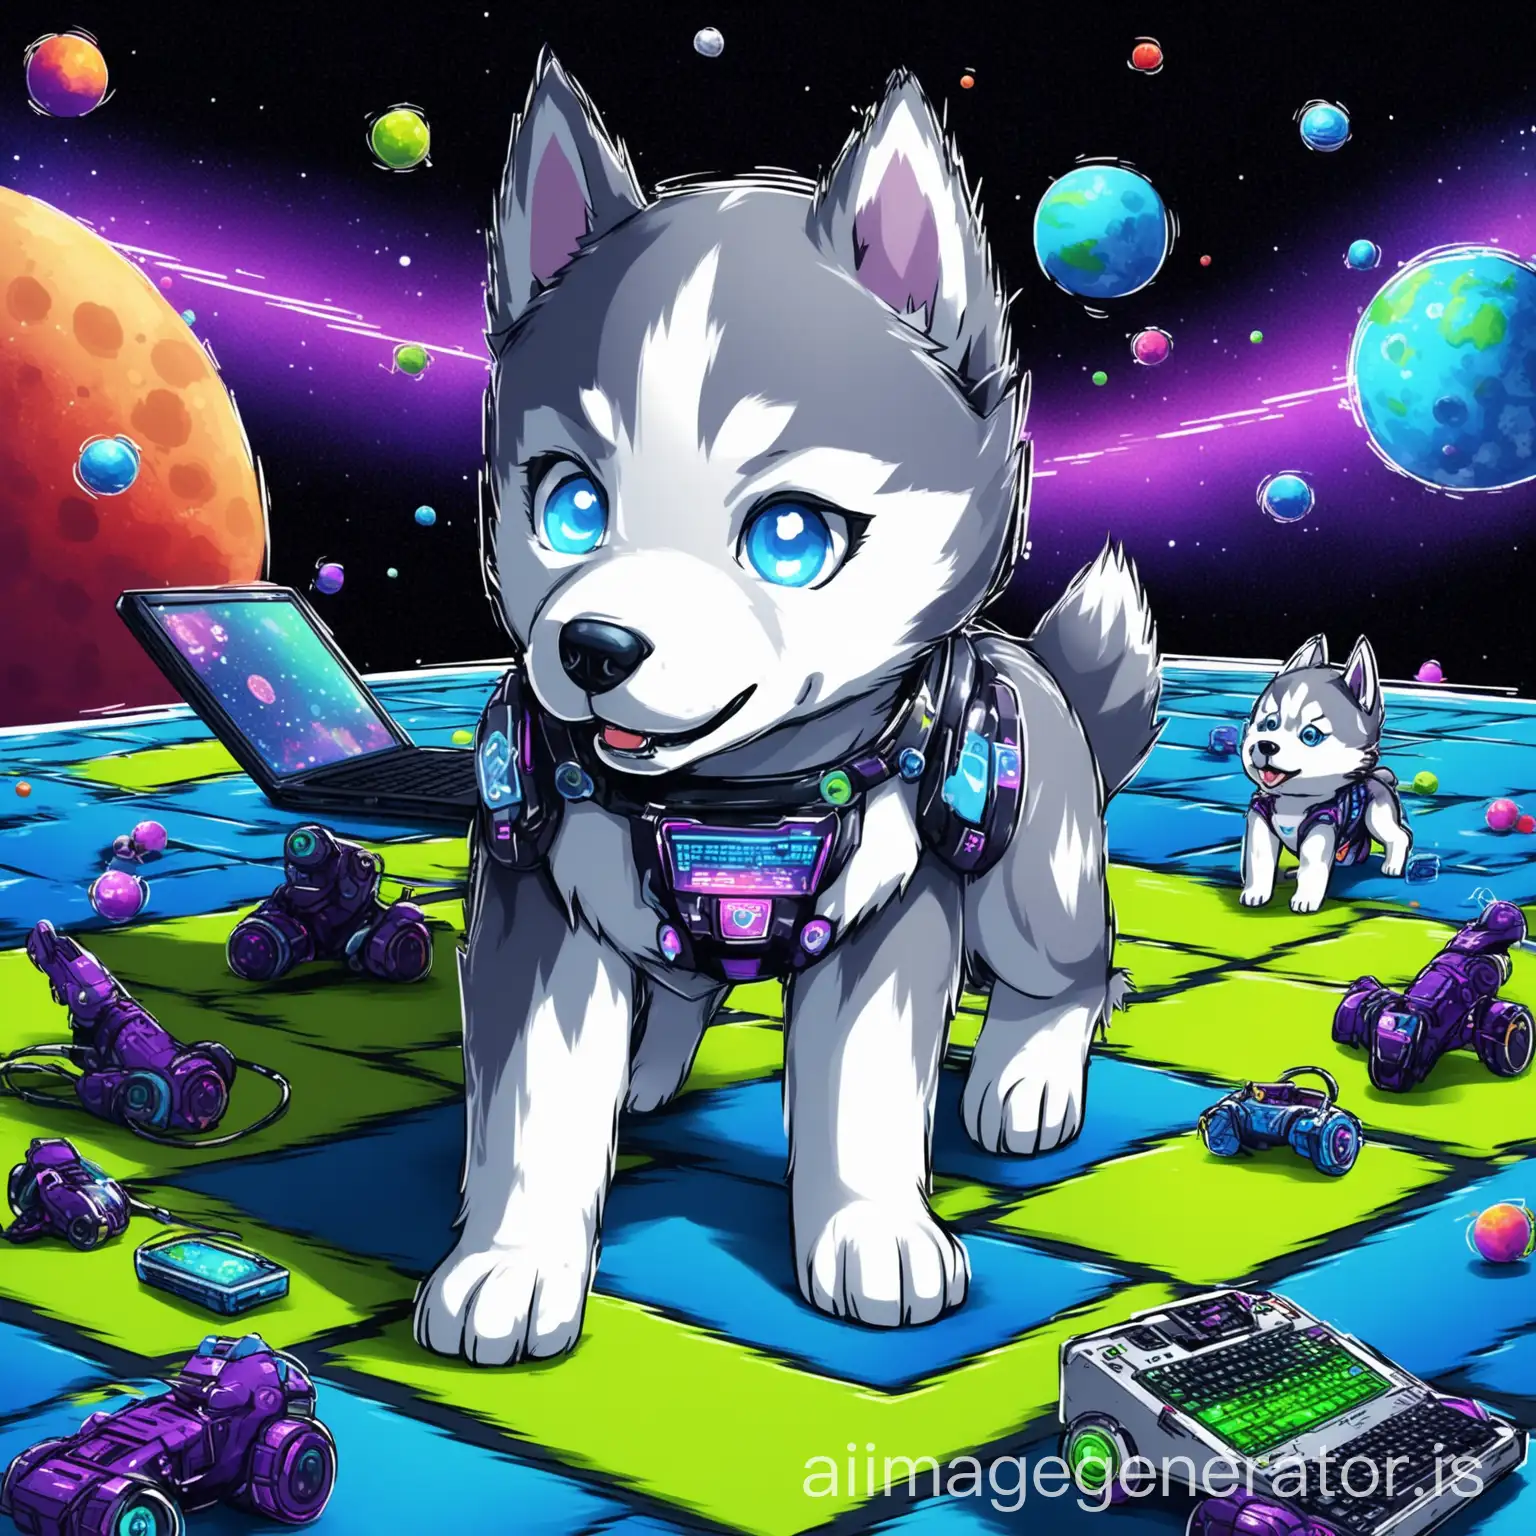 Playful-Cyber-Husky-Fantasy-in-Galactic-Space